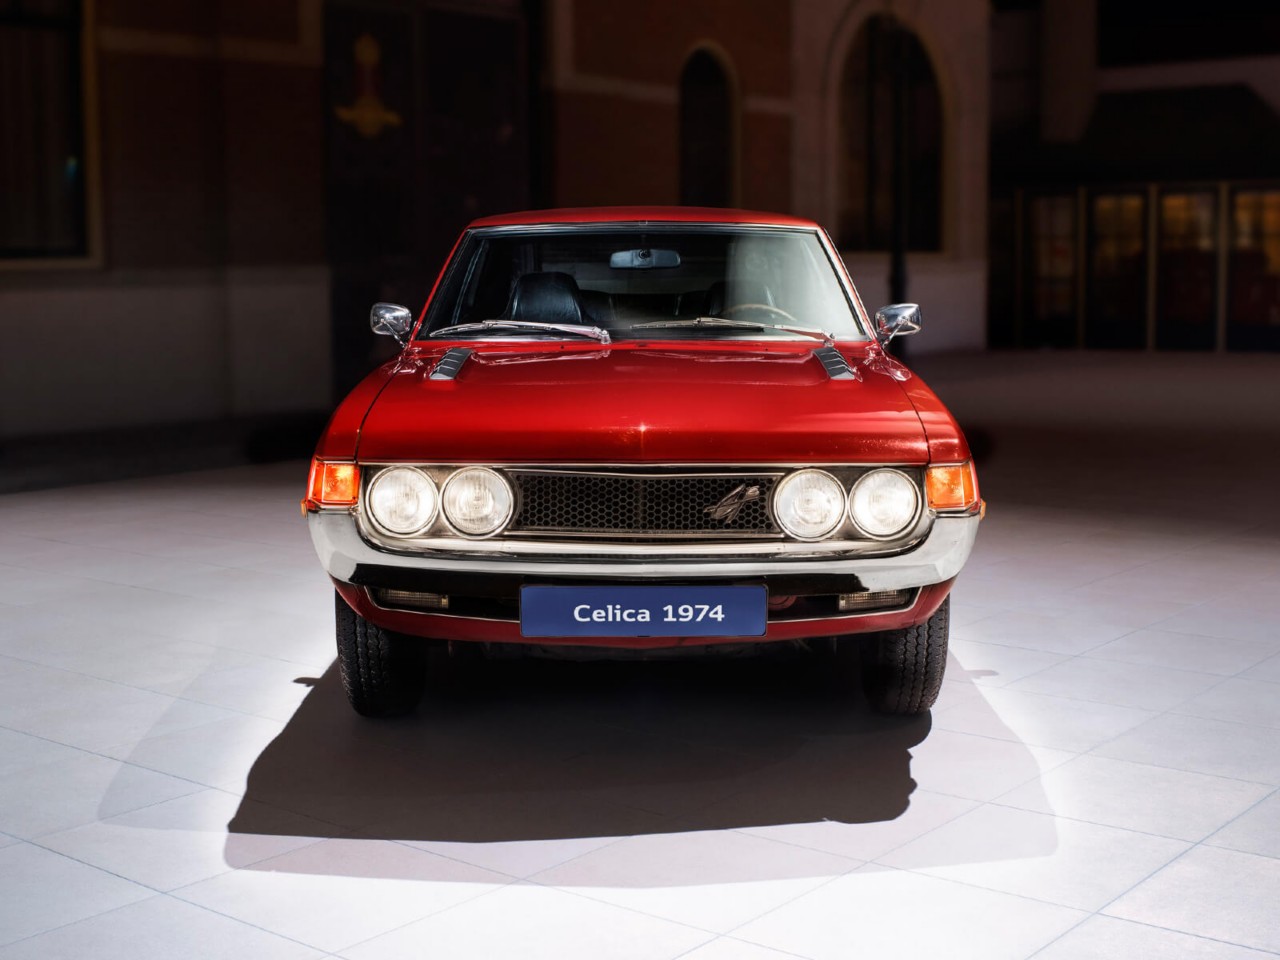 front view of Toyota Celica 1974